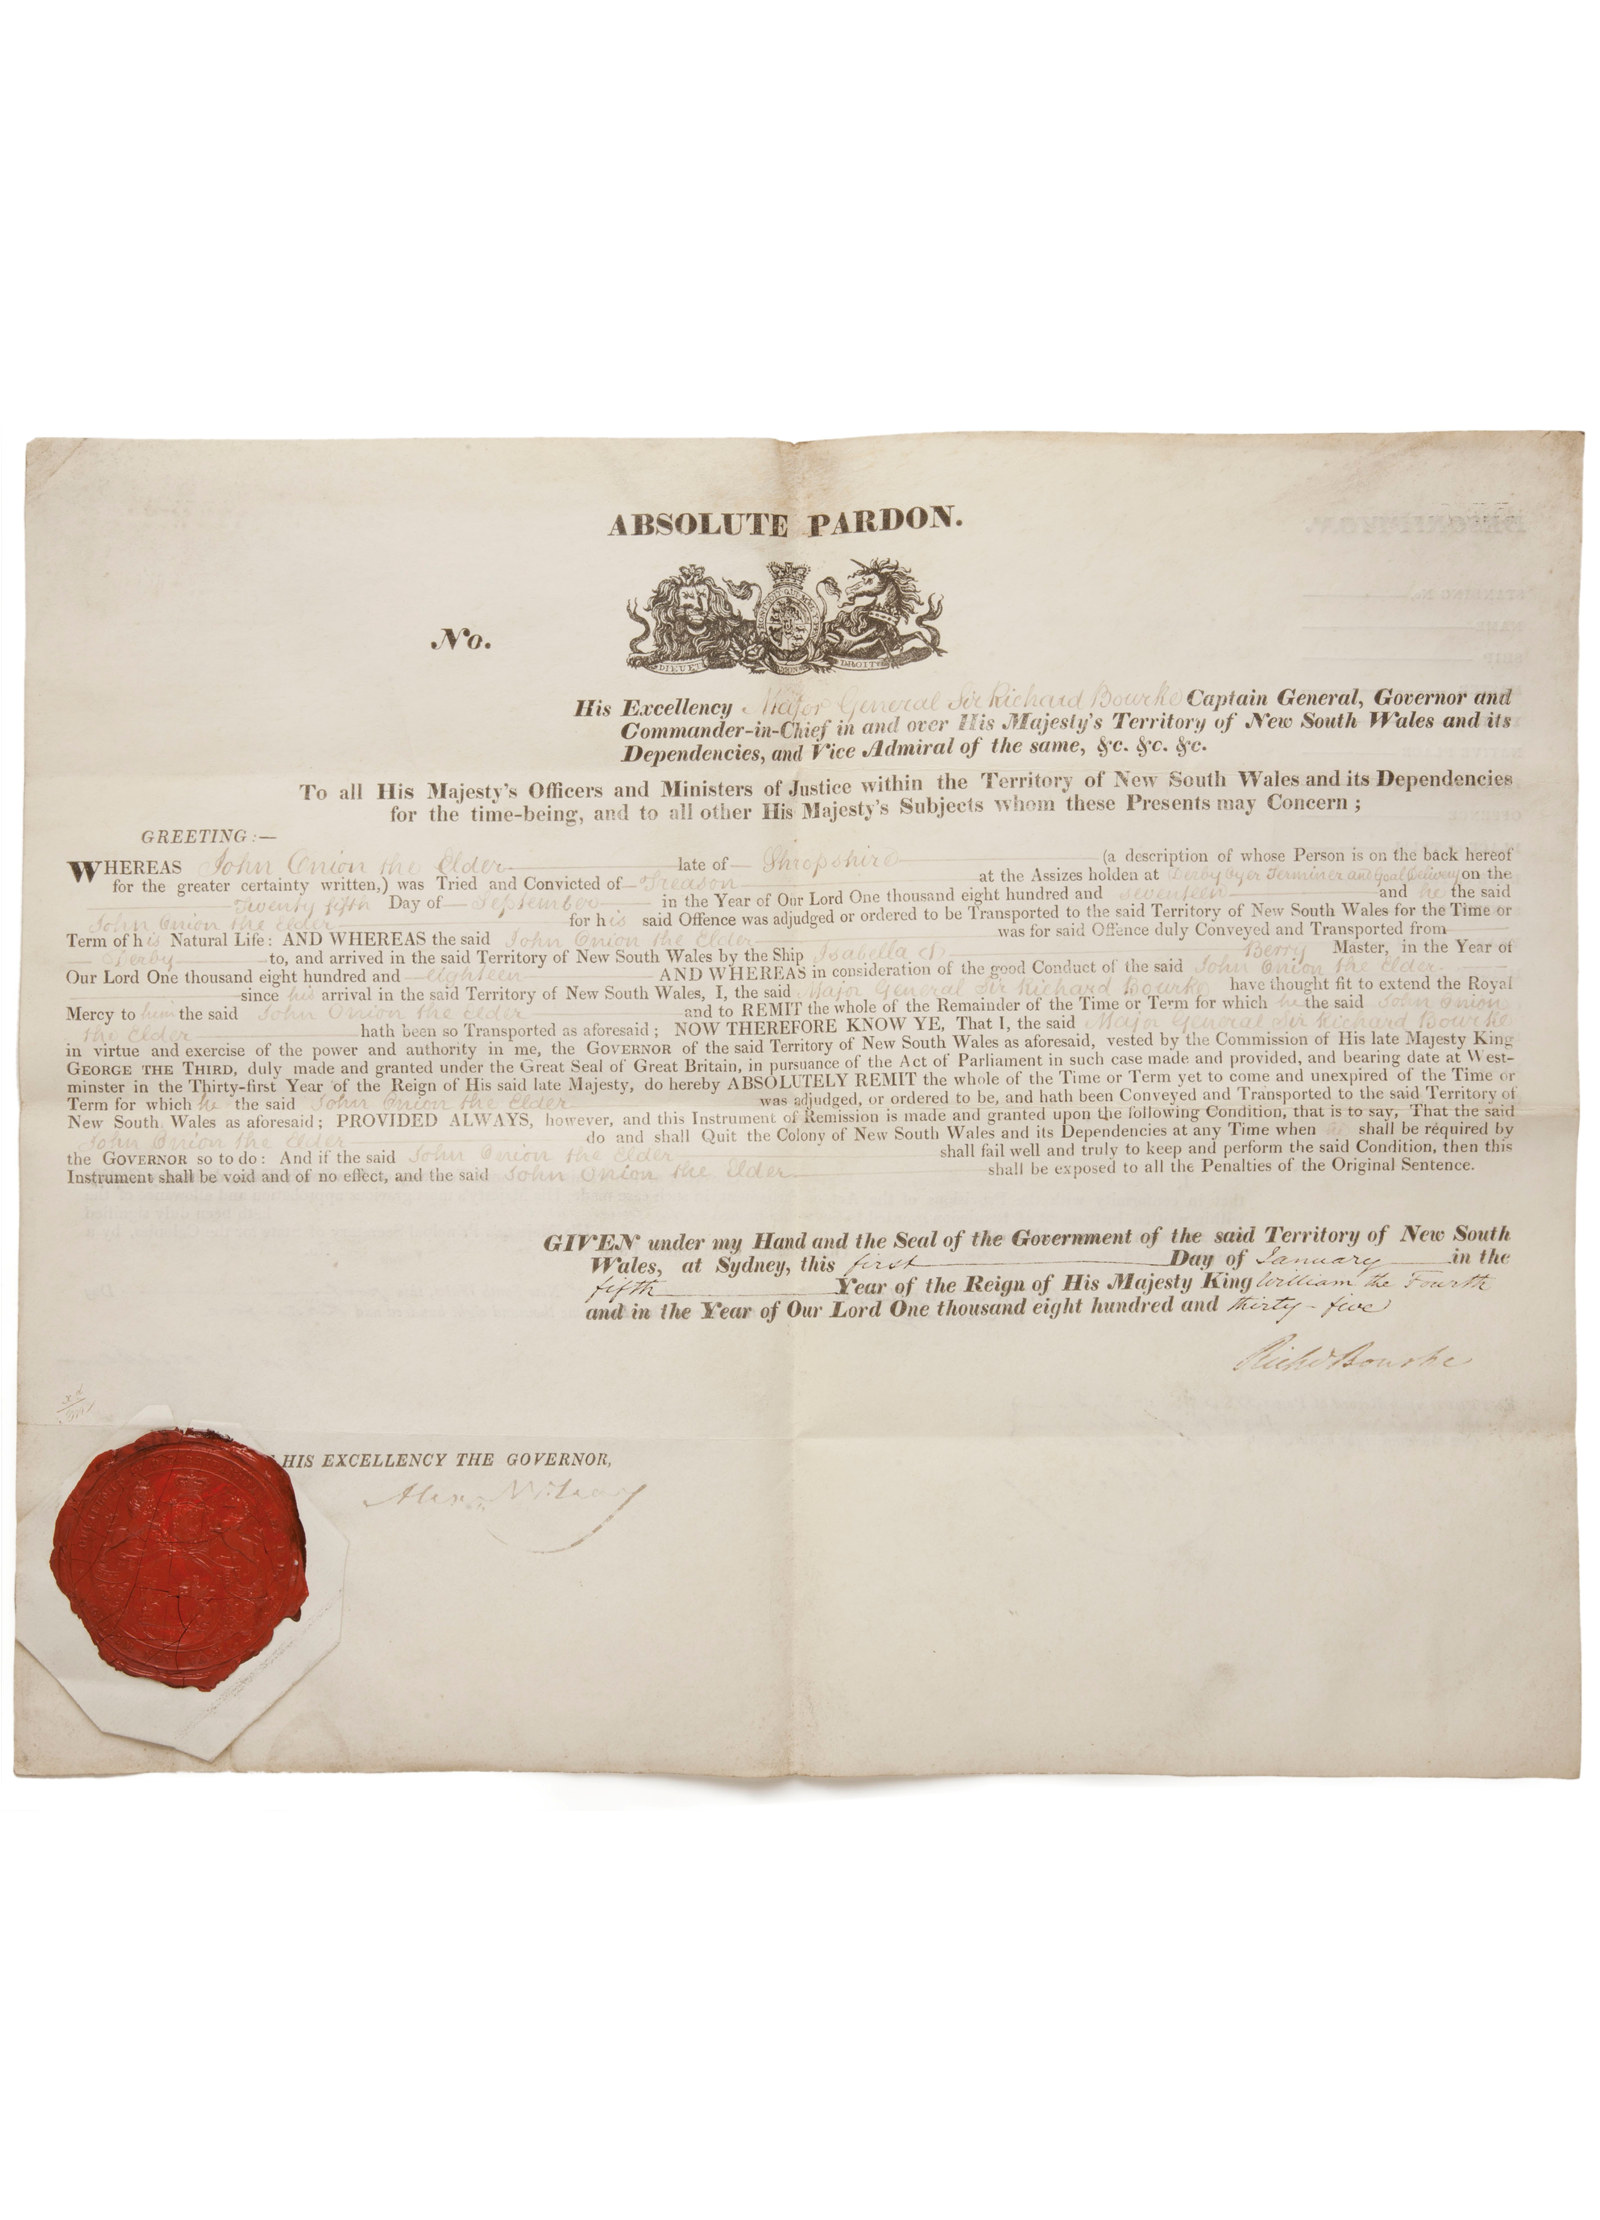 Image of a convict pardon. It has a red wax stamp in the lower left corner.